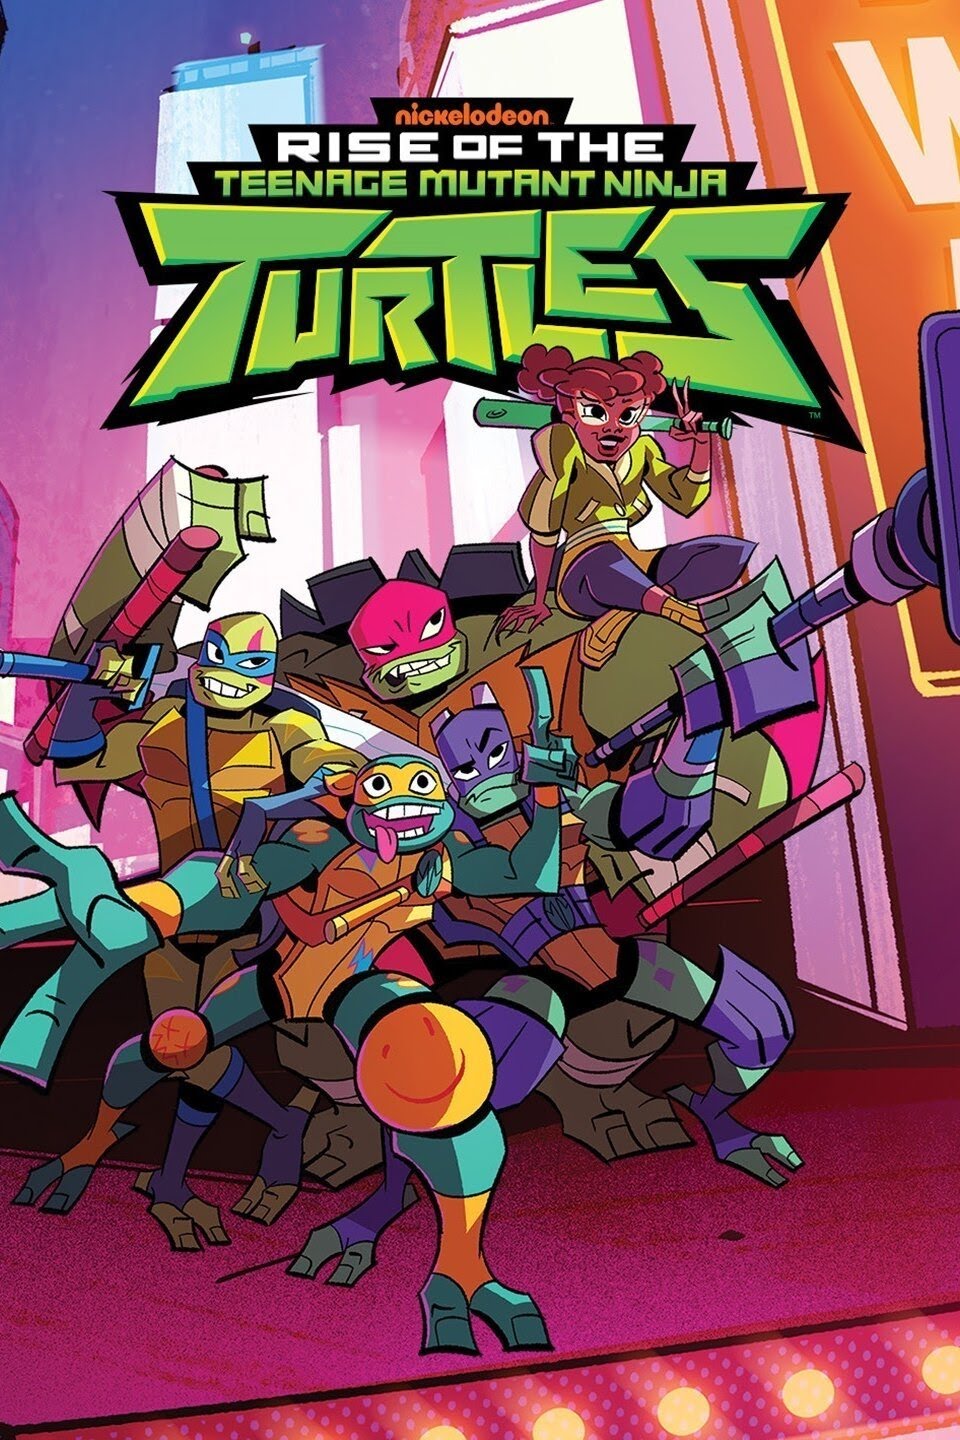 https://static.wikia.nocookie.net/international-entertainment-project/images/c/ca/Rise_of_the_Teenage_Mutant_Ninja_Turtles_poster.jpg/revision/latest?cb=20220301141711